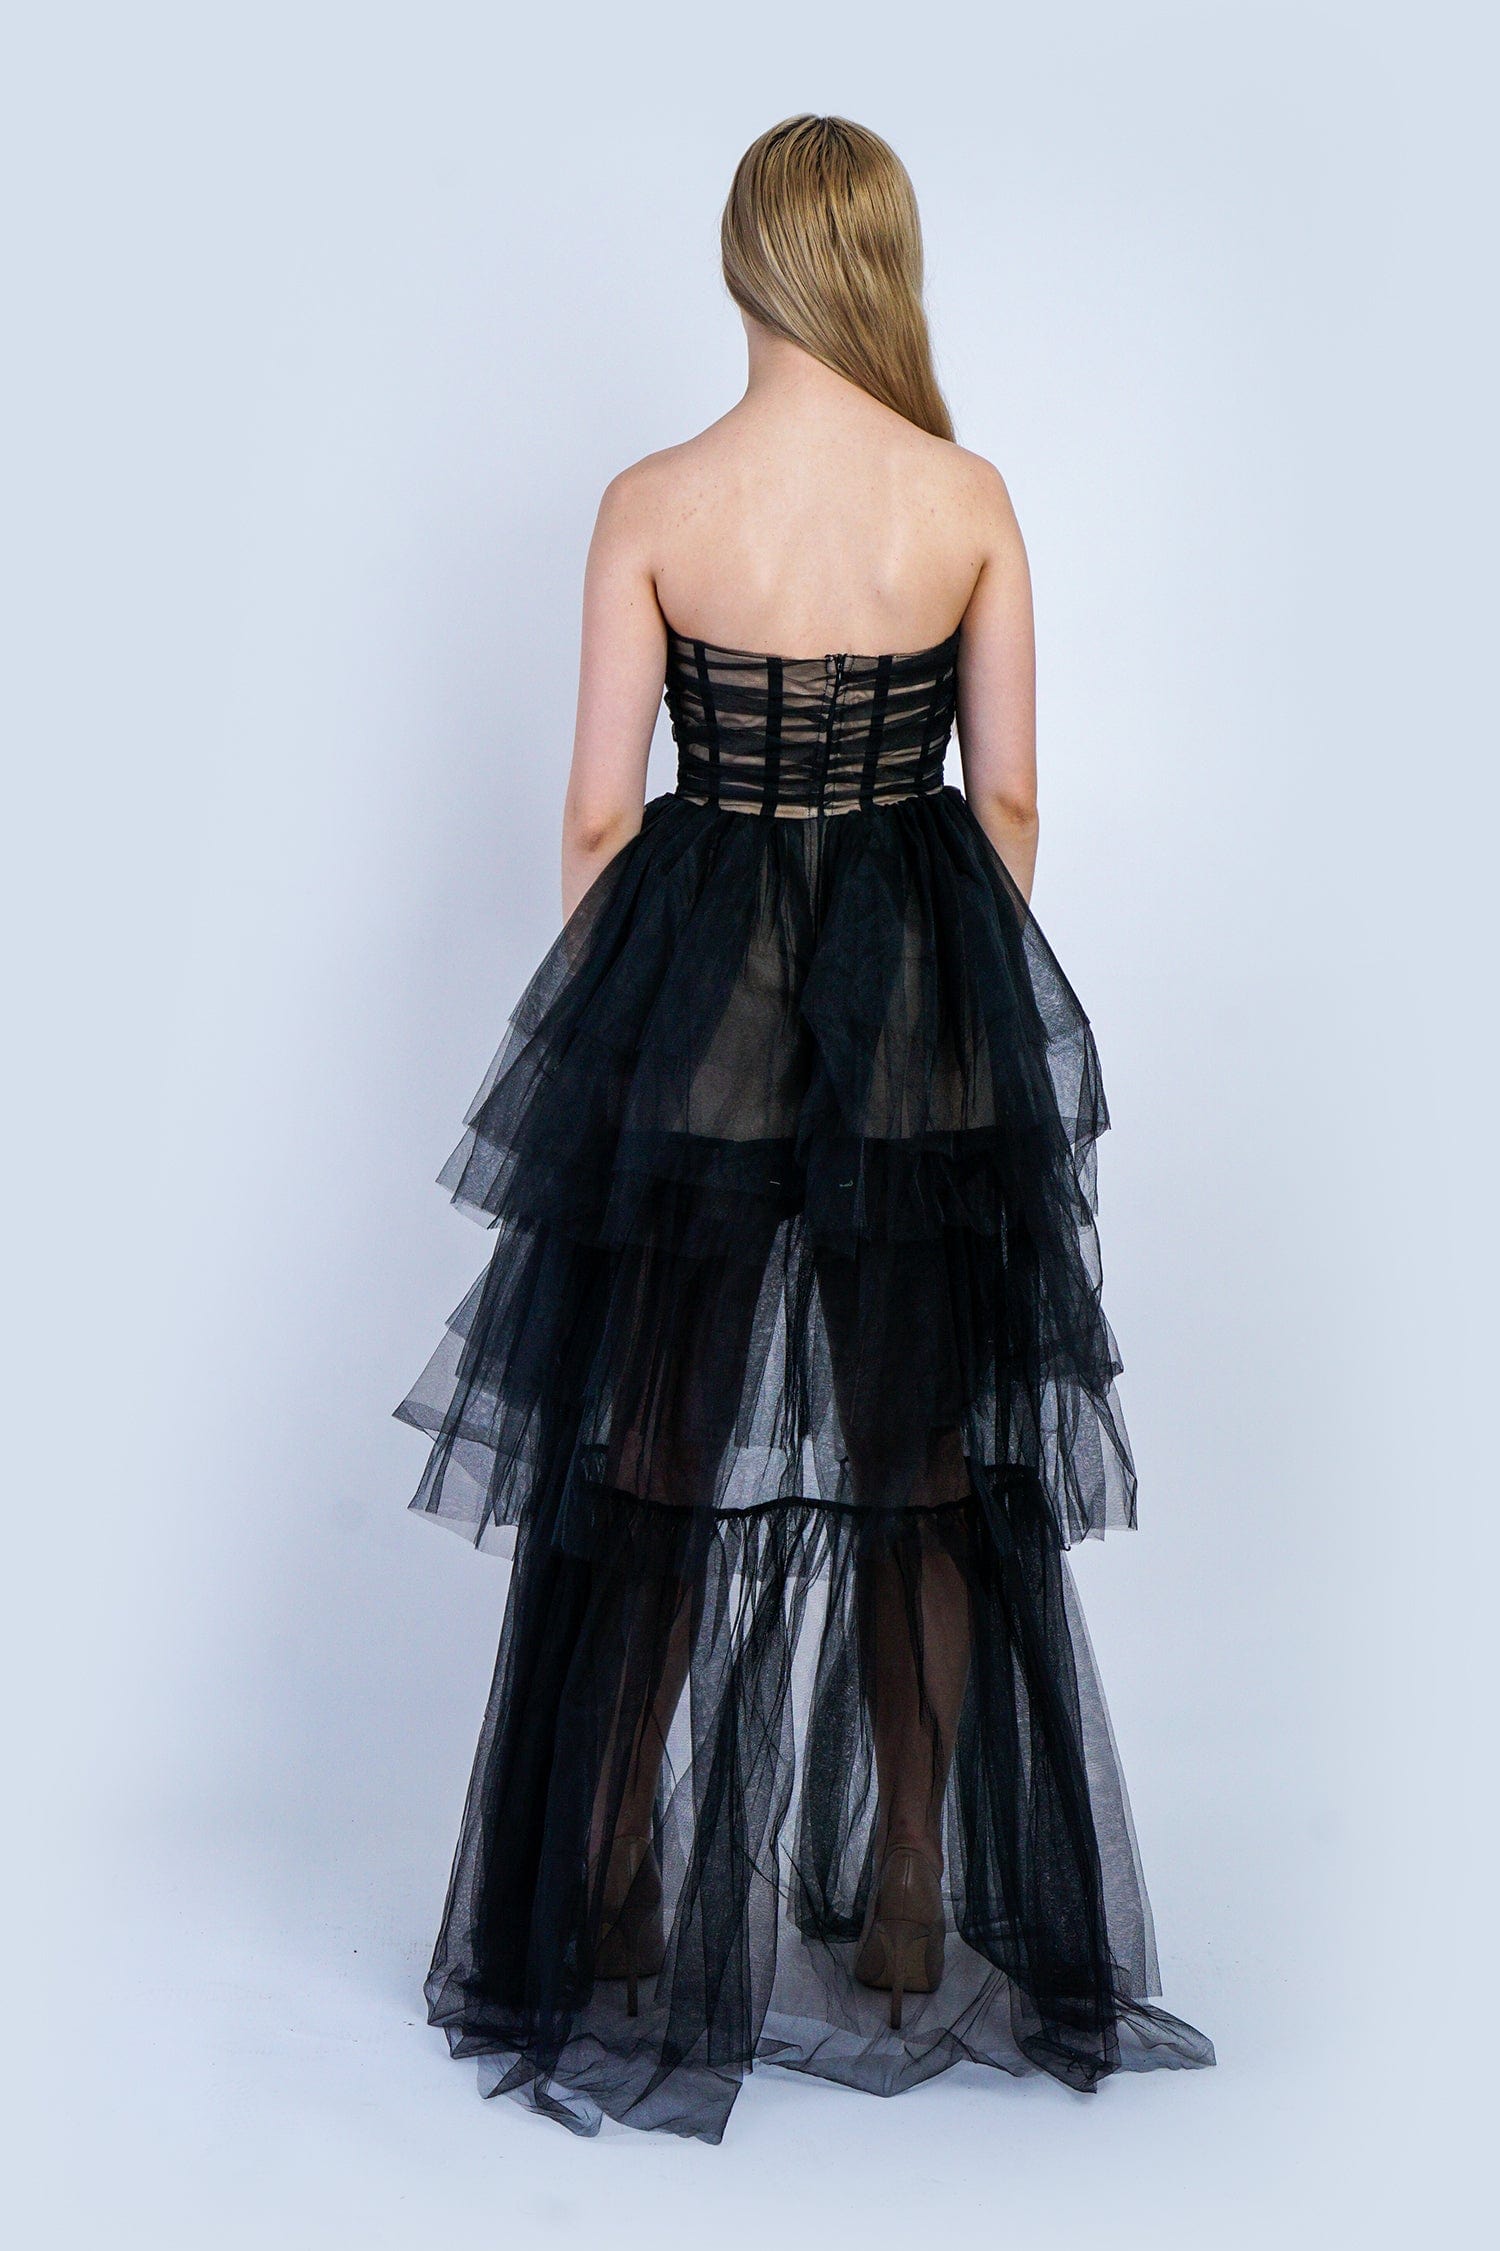 DCD GOWNS Black Nude Corset Sweetheart Tiered Gown